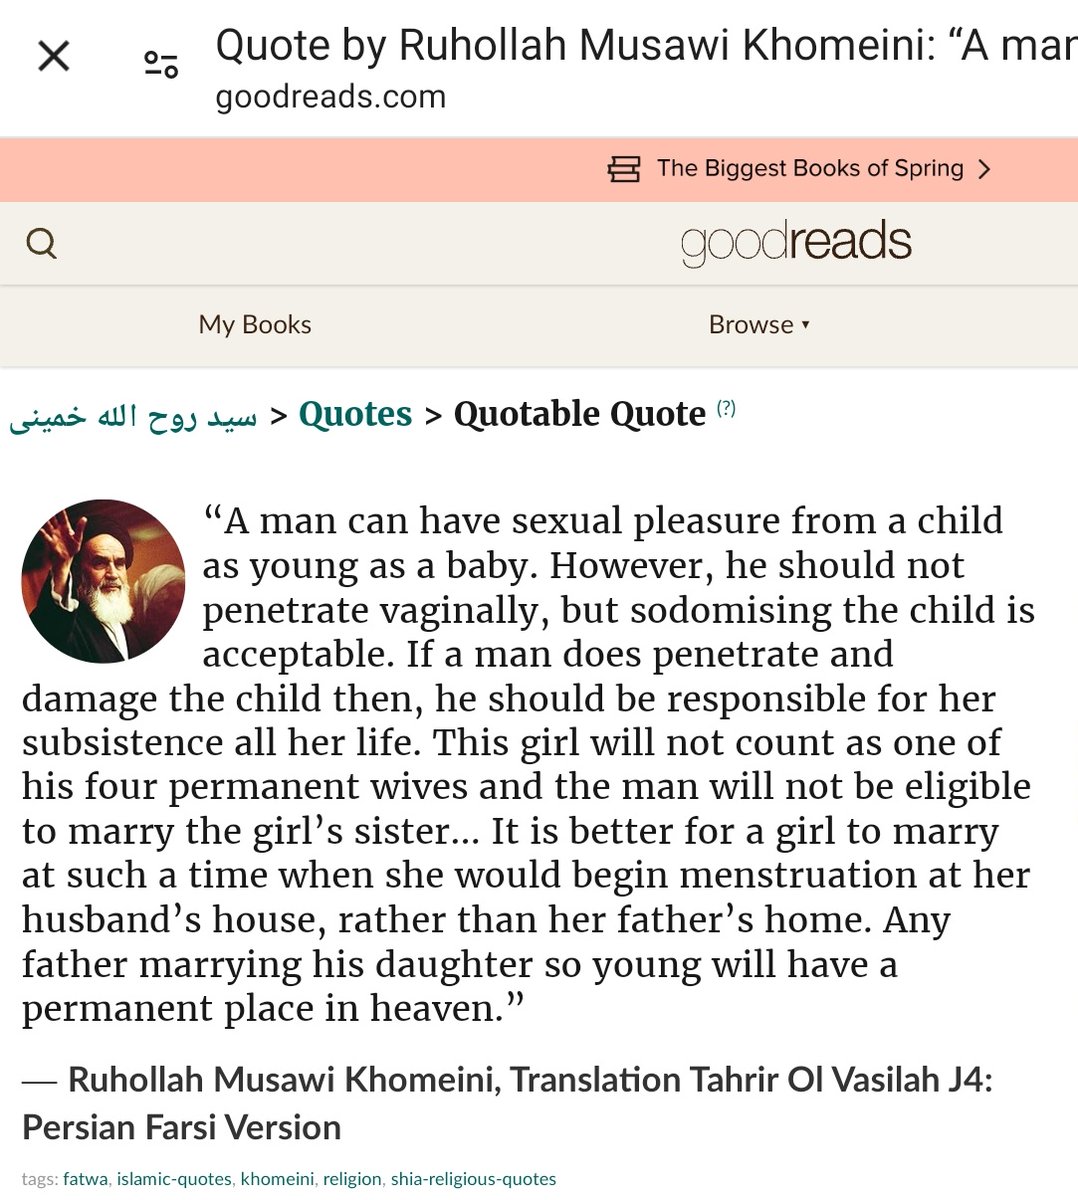 @abaskarimi66935 @REVMAXXING Even better, read the actual words from the actual book from Iran's theological and spiritual leader of the #IslamicRevolution, from his own website.  
reddit.com/r/iranian/s/55…
It's page 229 on the Khomeini's own book. Follow the link to it.